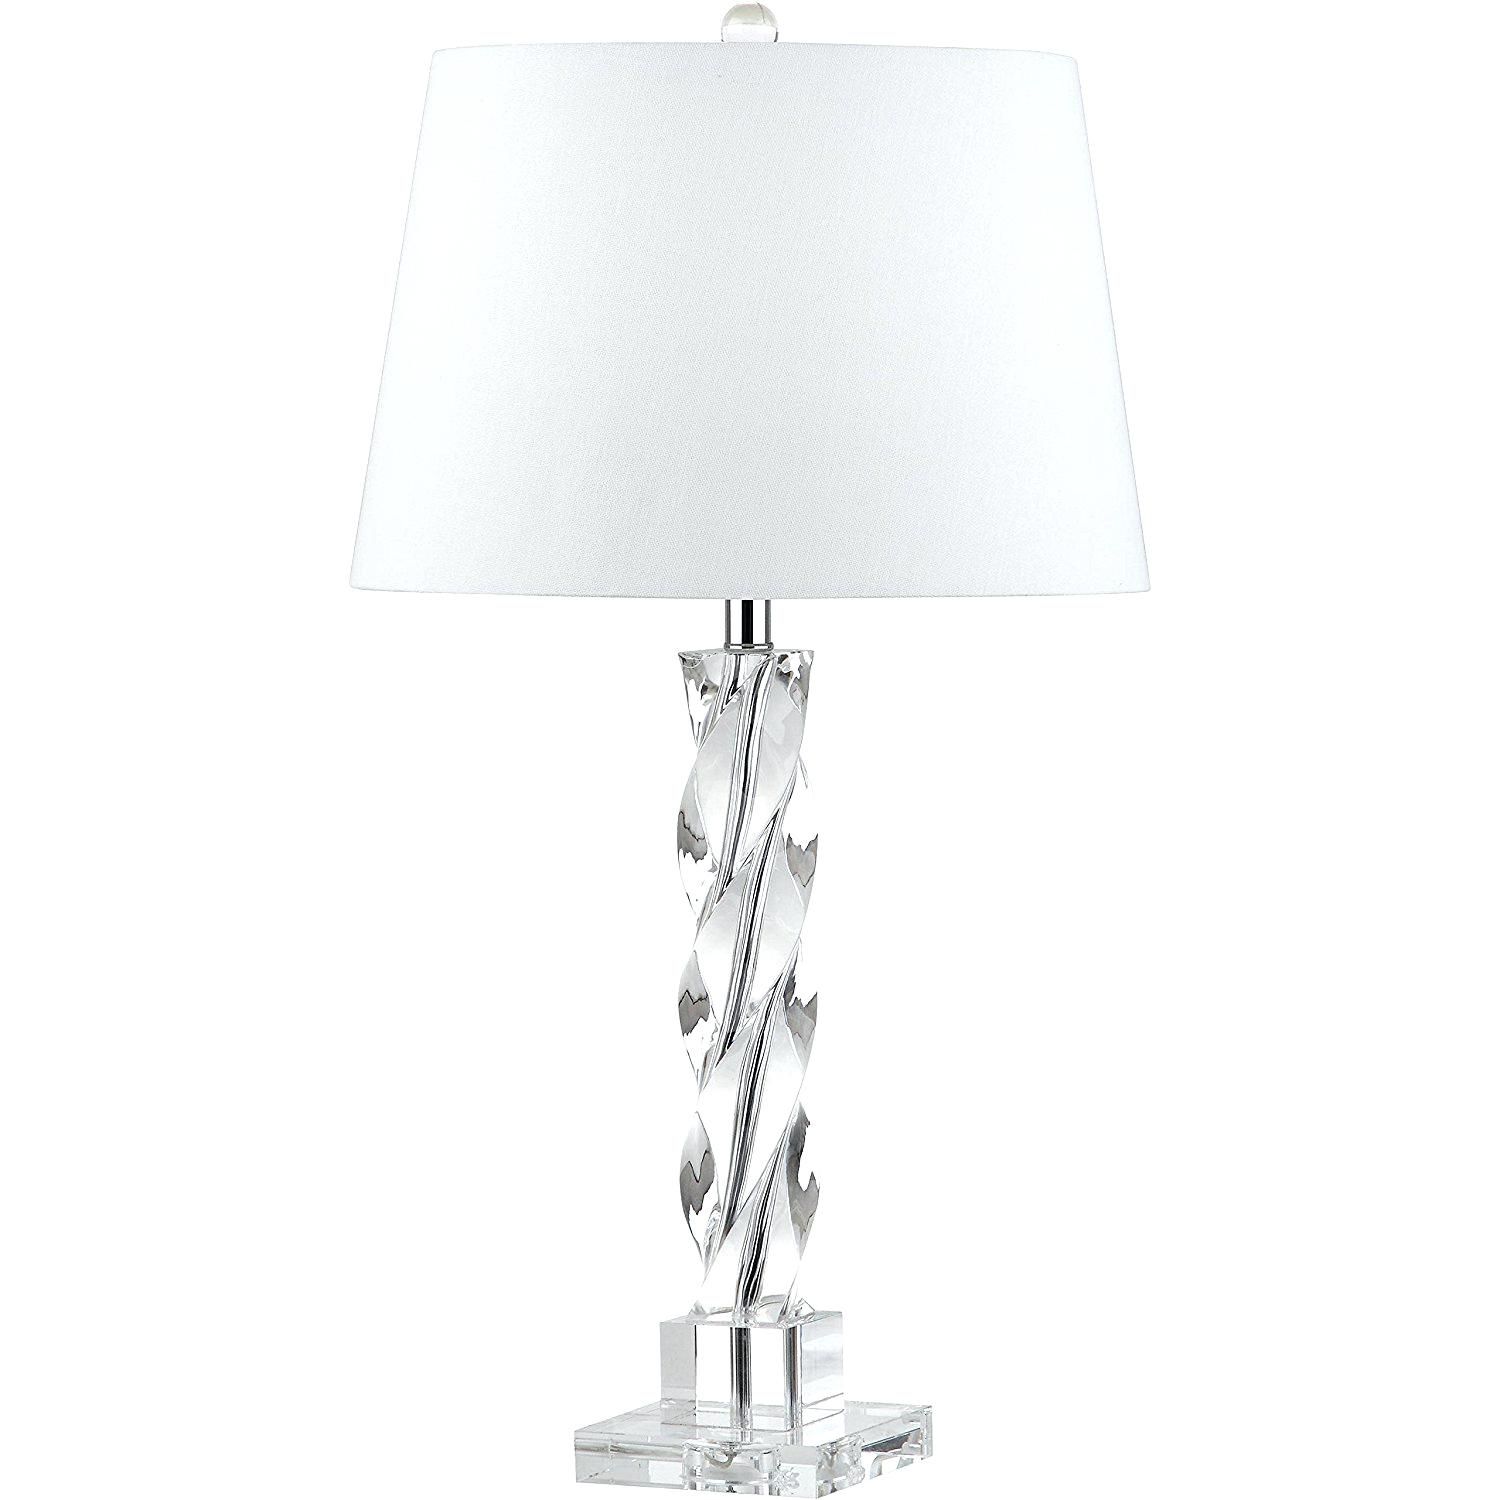 Overstock Table Lamps Most Magic White Lamp Lamp Shades For Table Throughout Overstock Living Room Table Lamps (View 15 of 15)